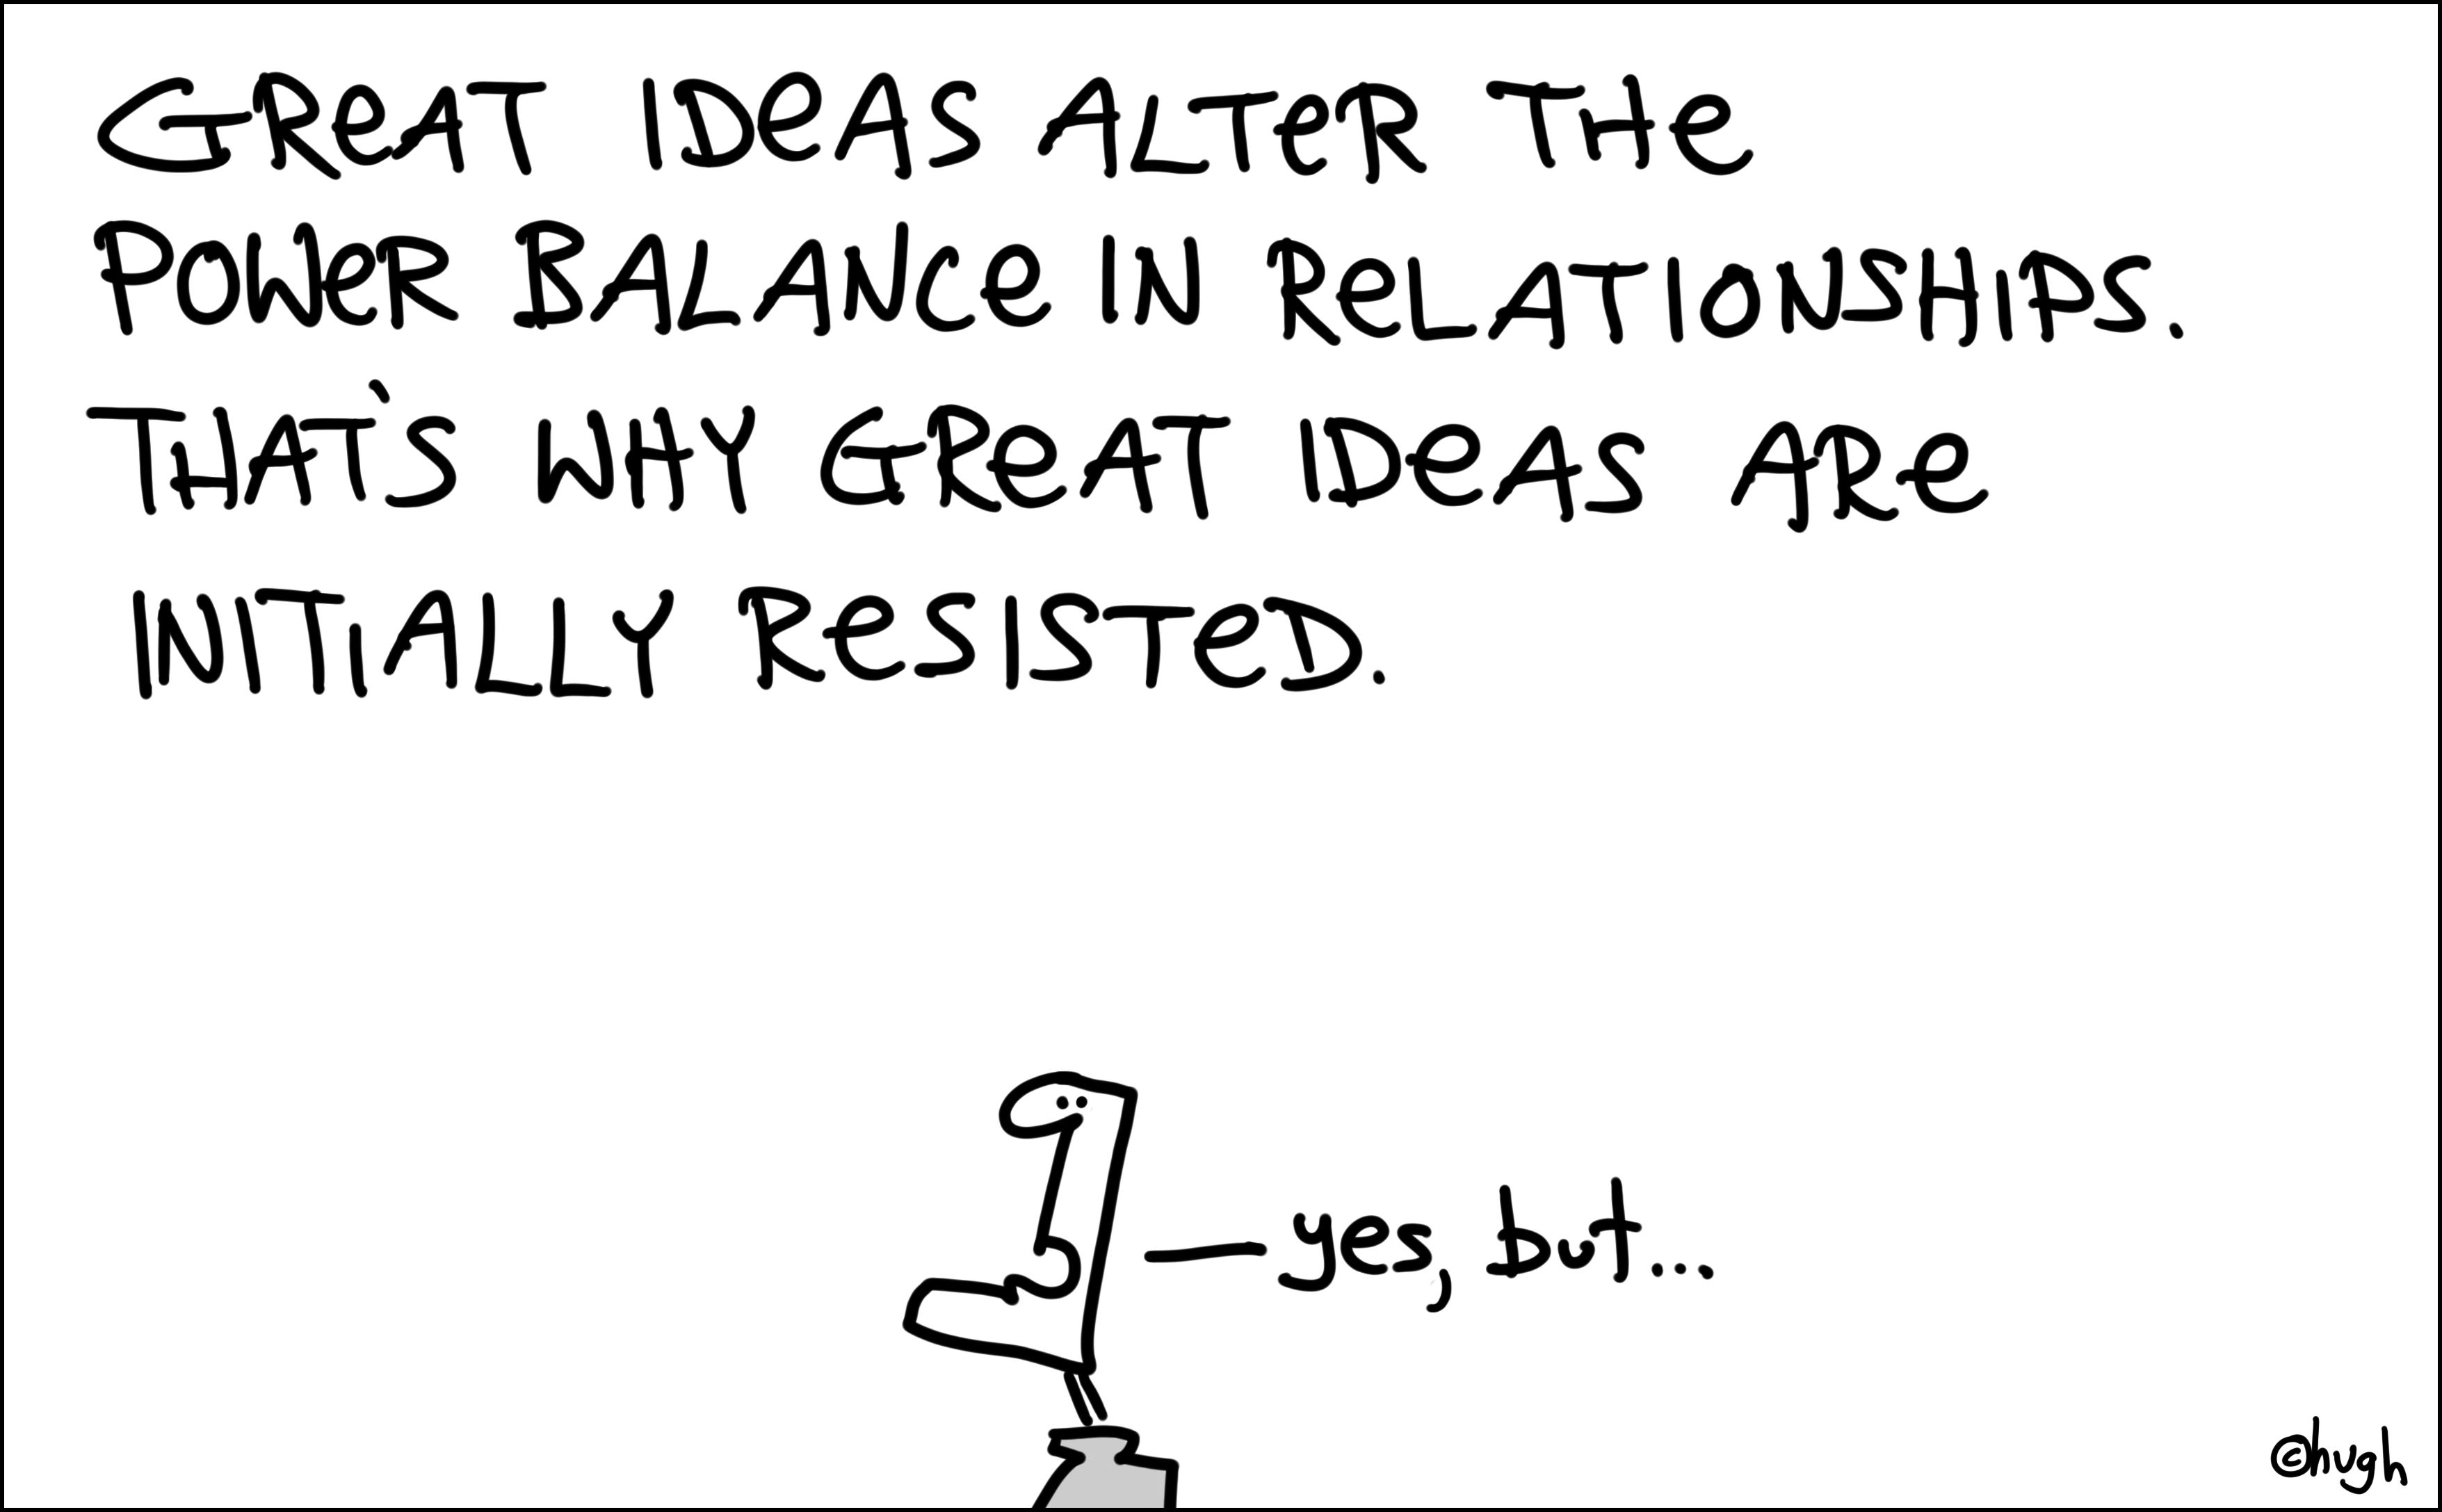 Great ideas alter the power balance in relationships. That's why great ideas are initially resisted